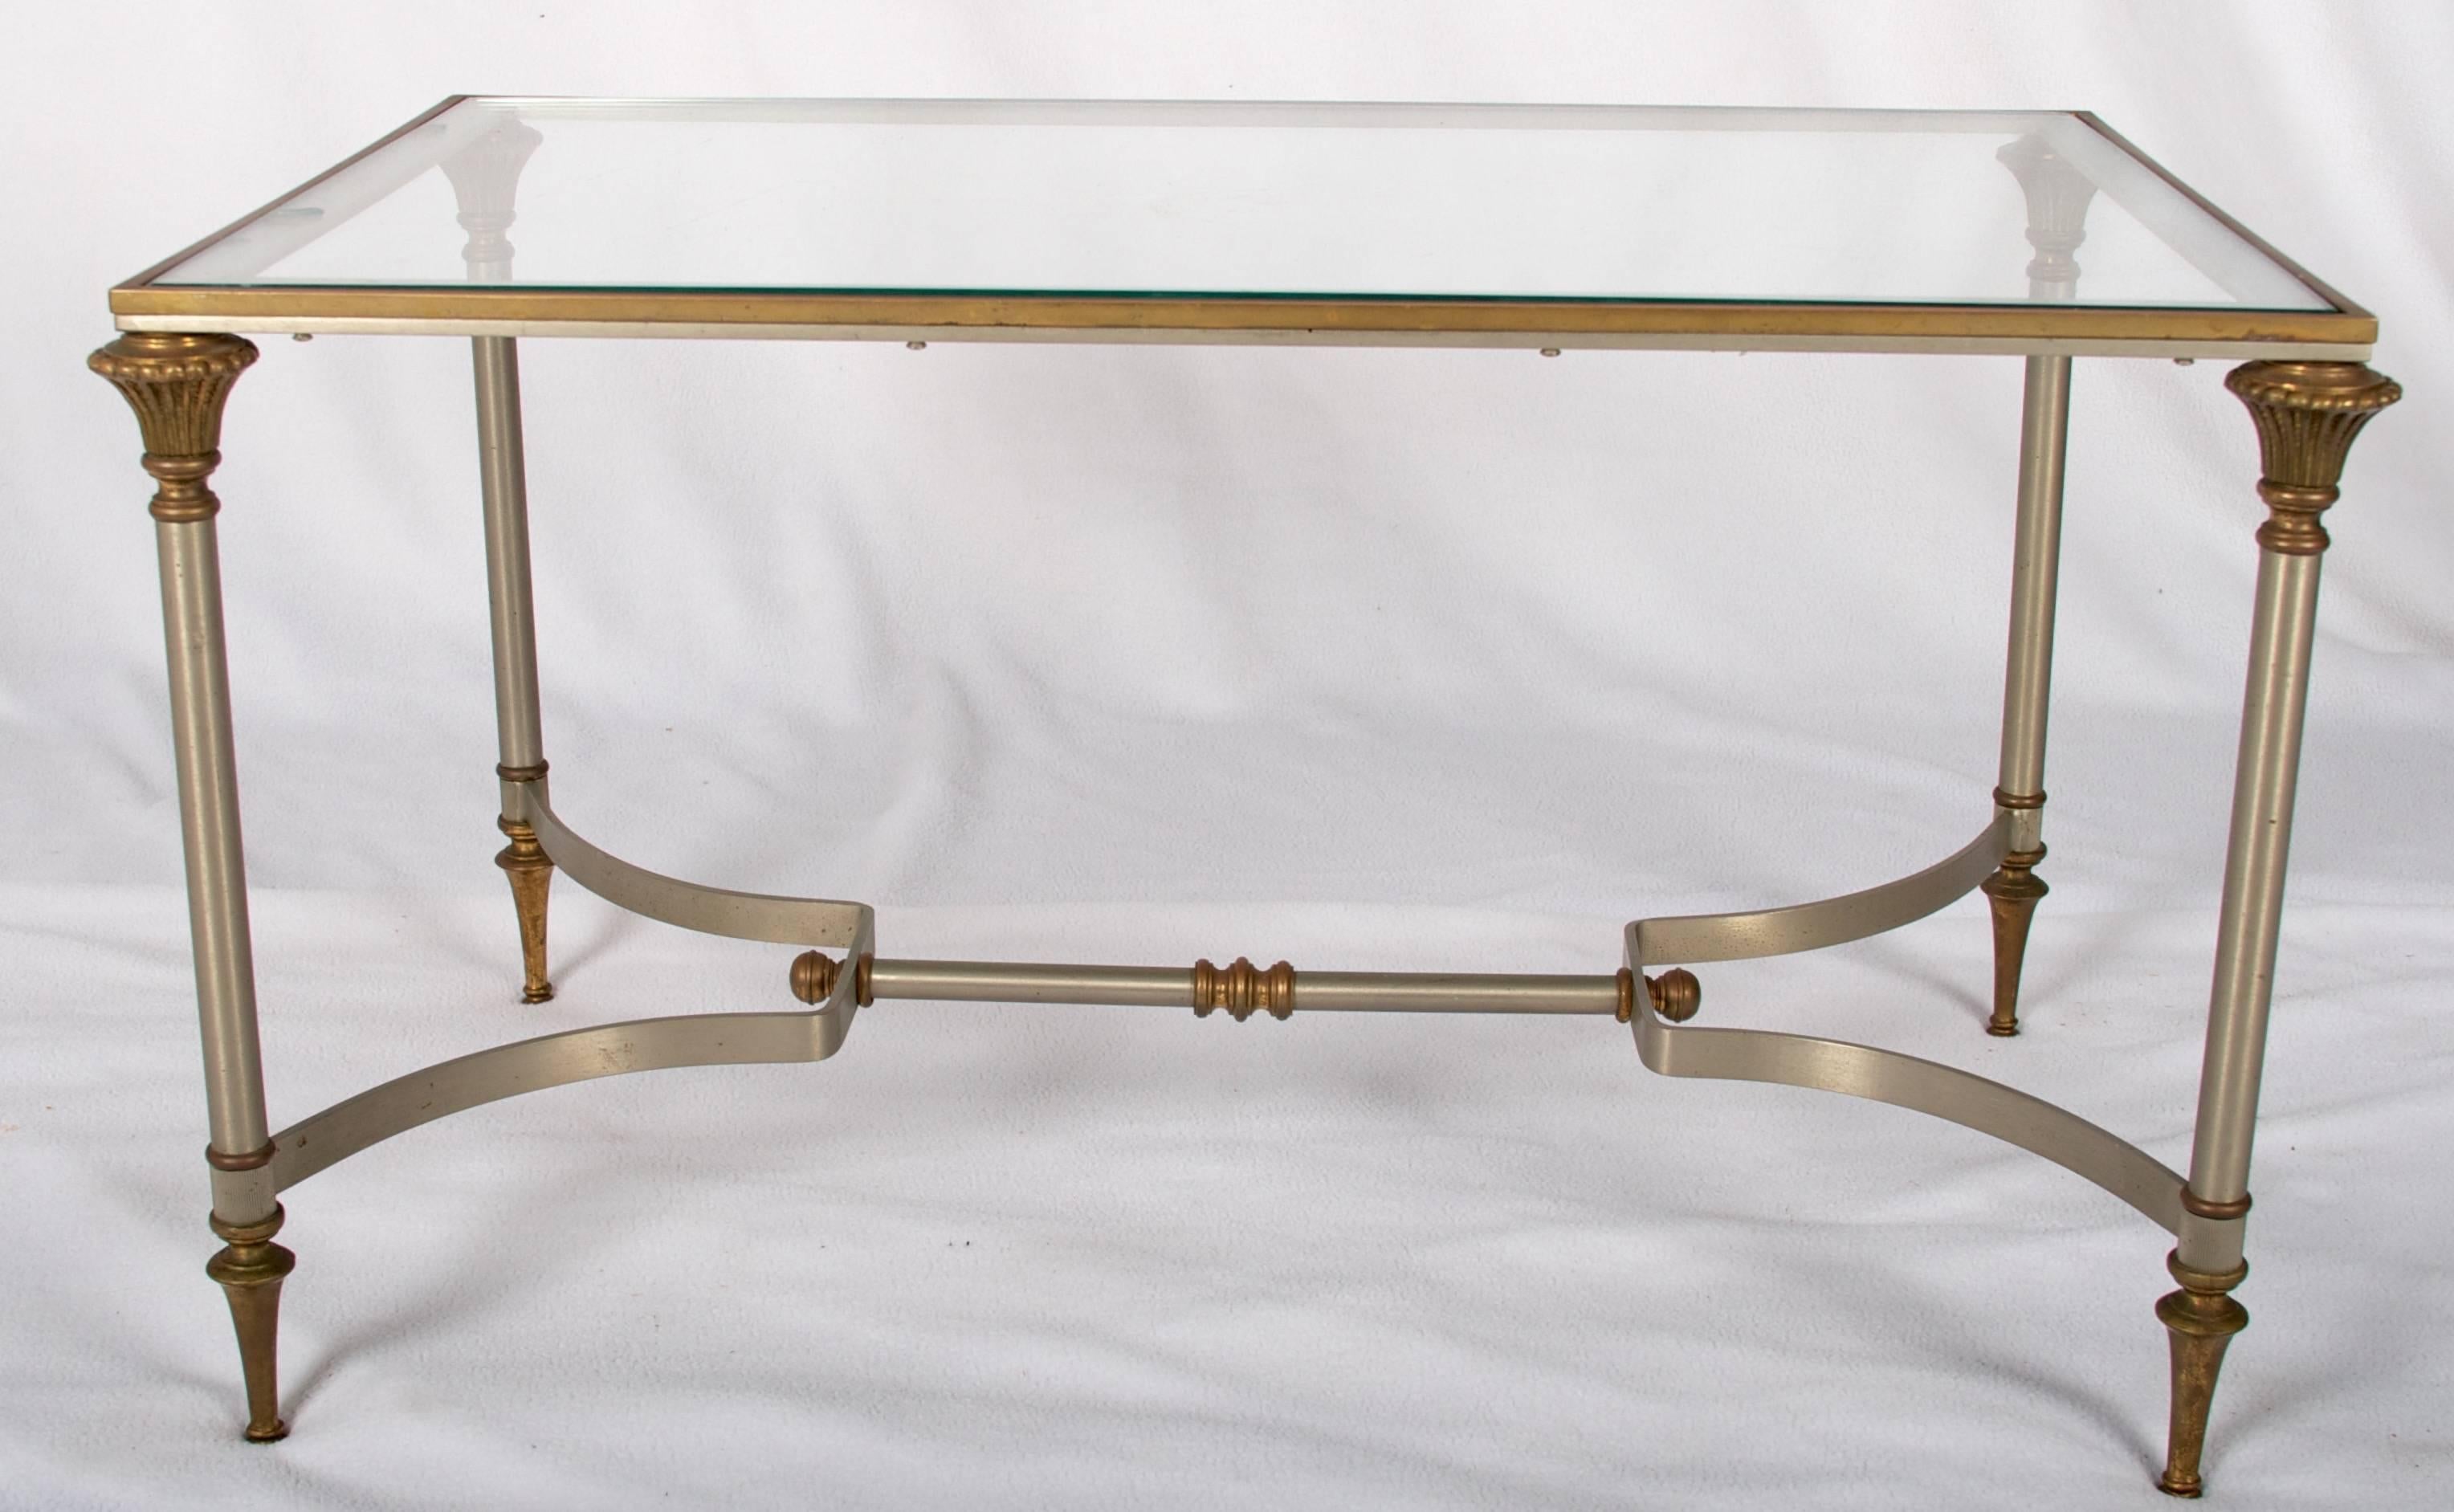 Neoclassical Revival French Steel and Brass Petit Coffee Table, in the Style of Jansen, Paris